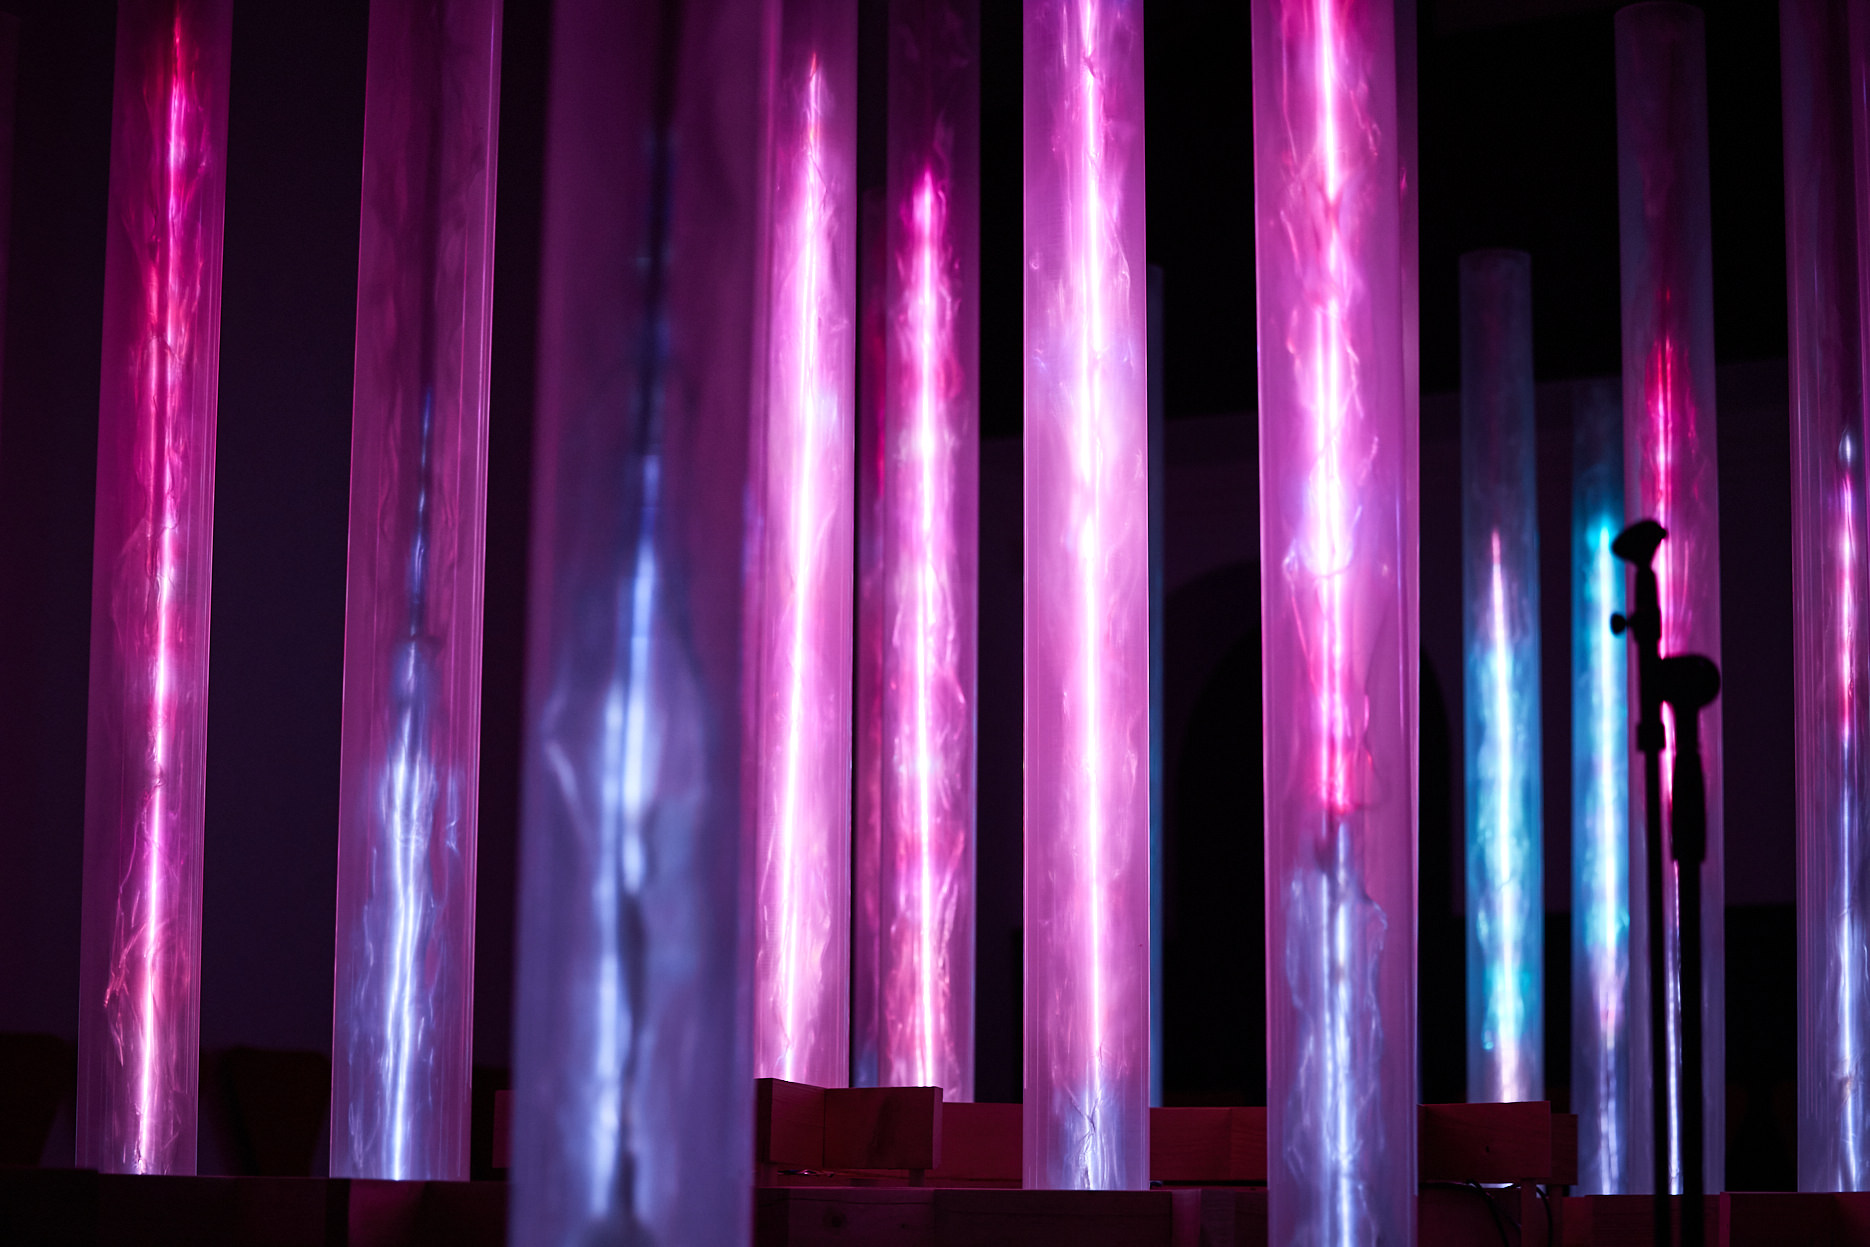 An installation of pink and blue glowing columns.